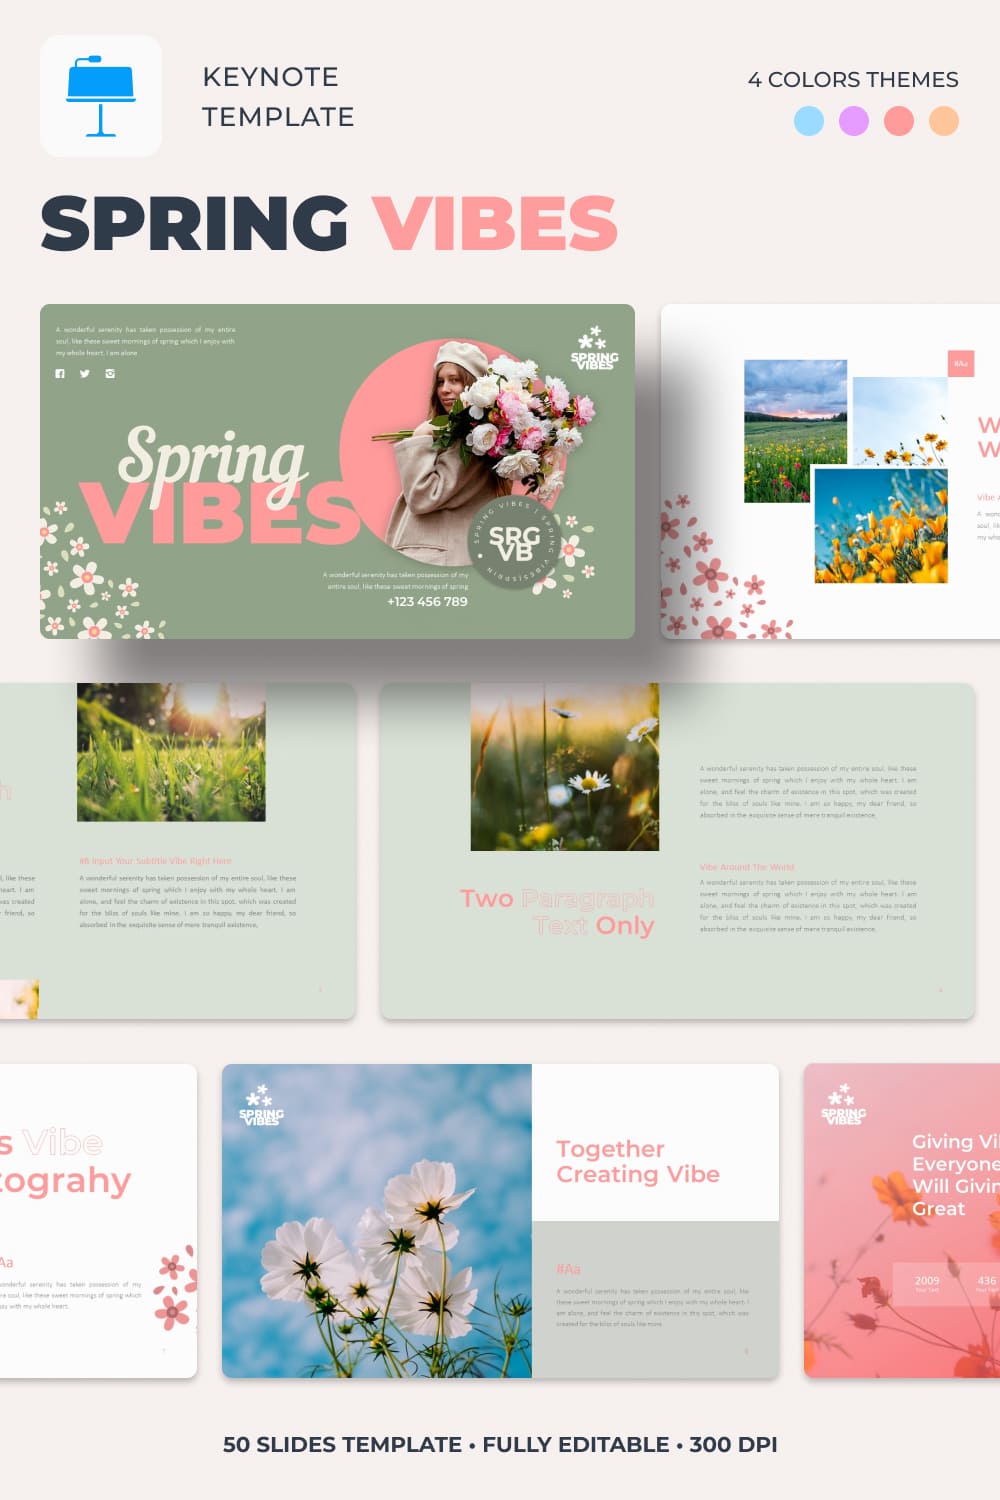 Spring Vibes Keynote Template - pinterest image preview.